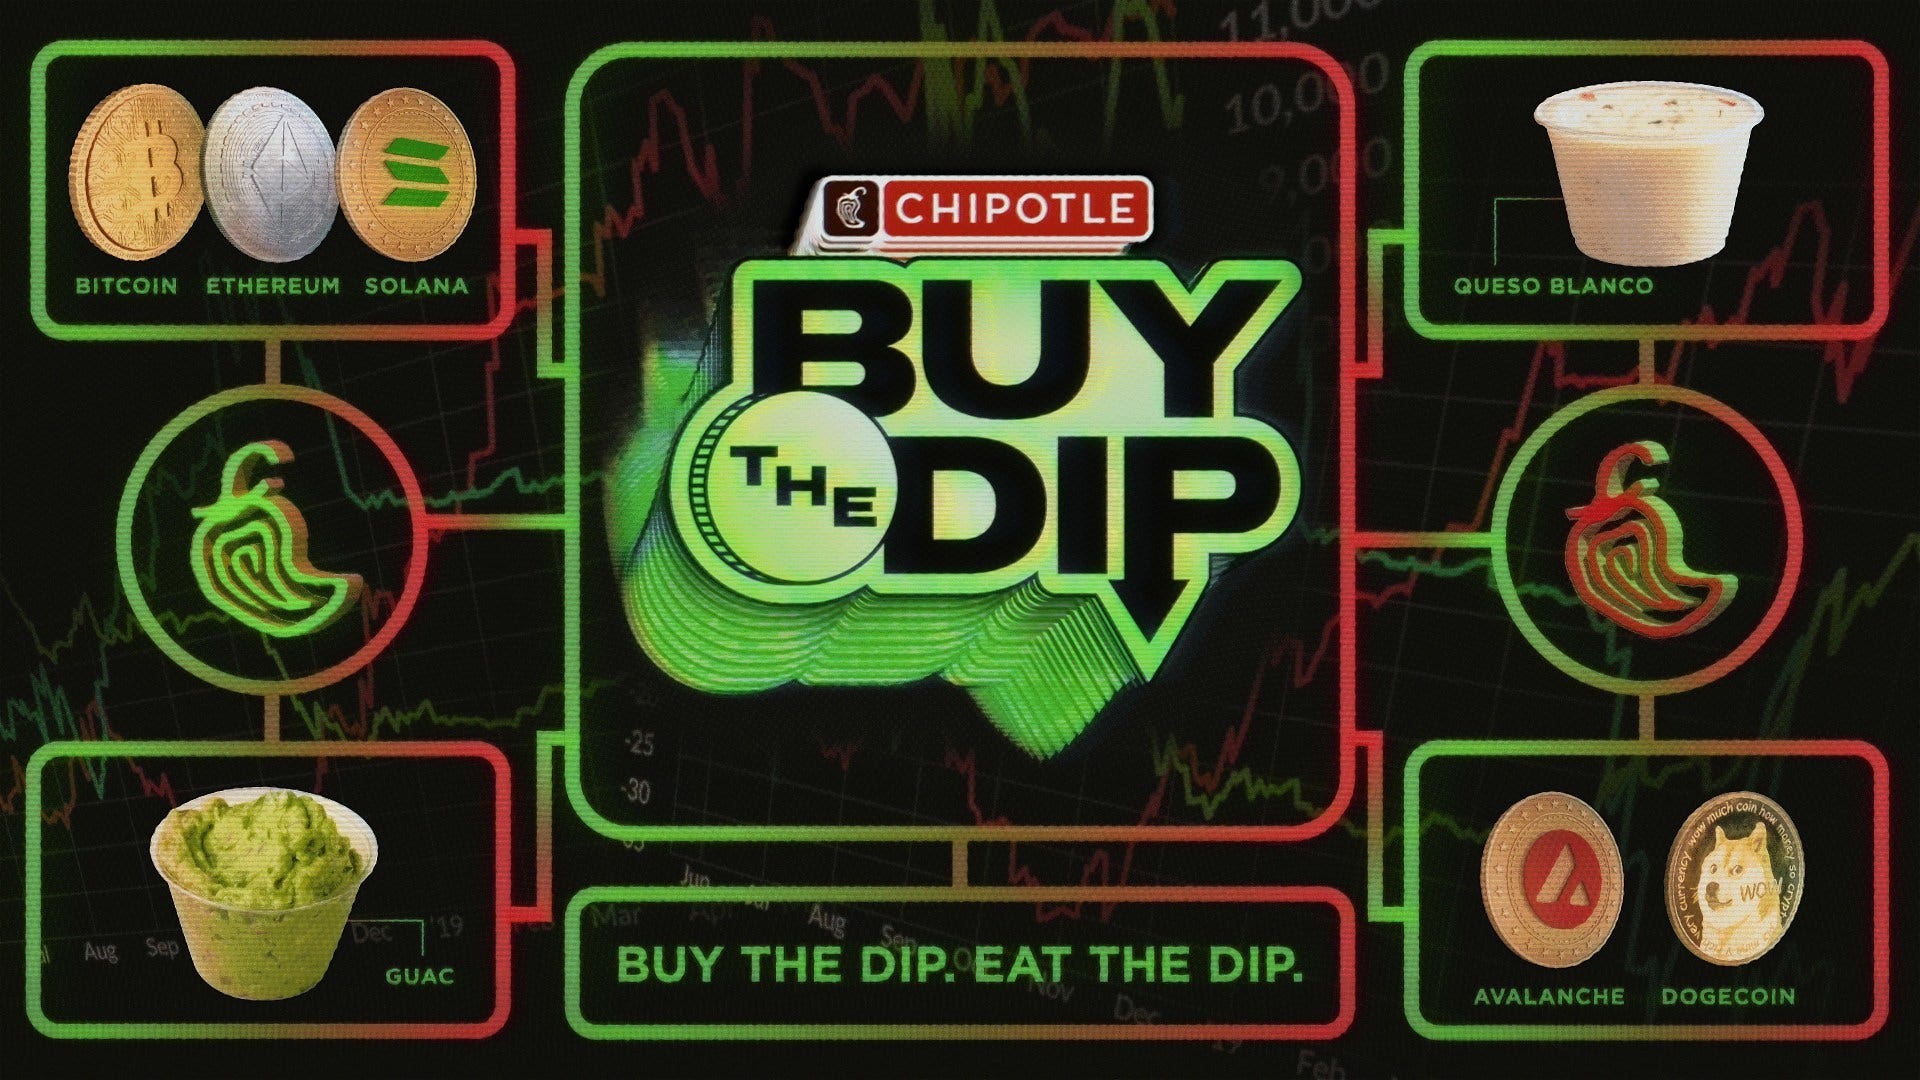 Chips And 'Buy the Dip'? This Top 10 Restaurant Chain Offering A Chance To Win Bitcoin, Dogecoin And More